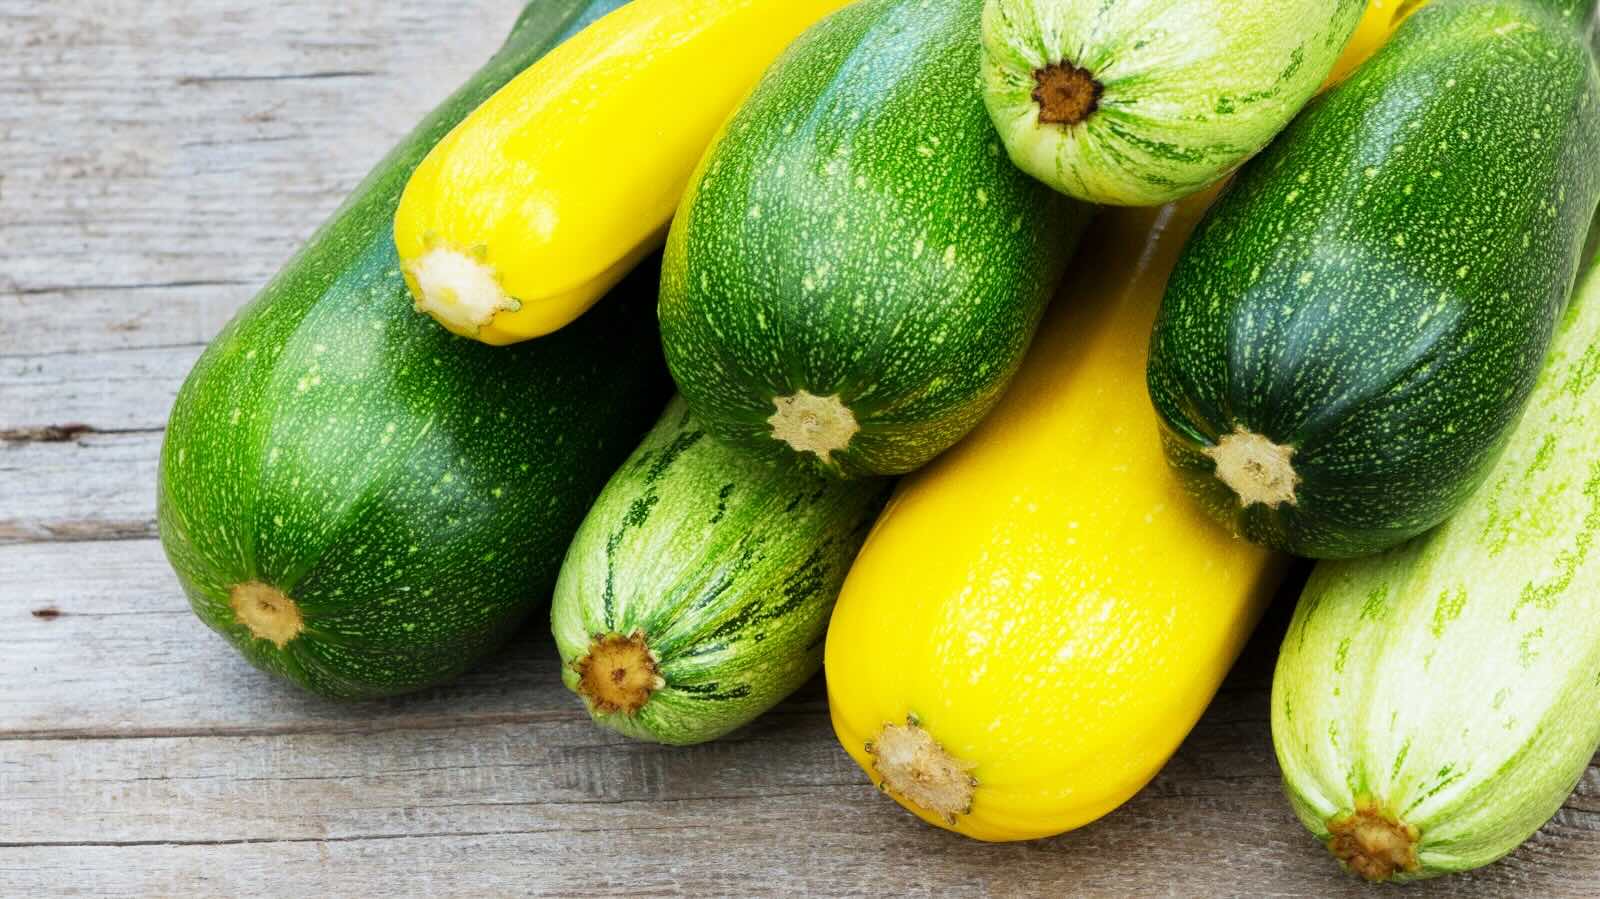 How To Store Squash And Zucchini